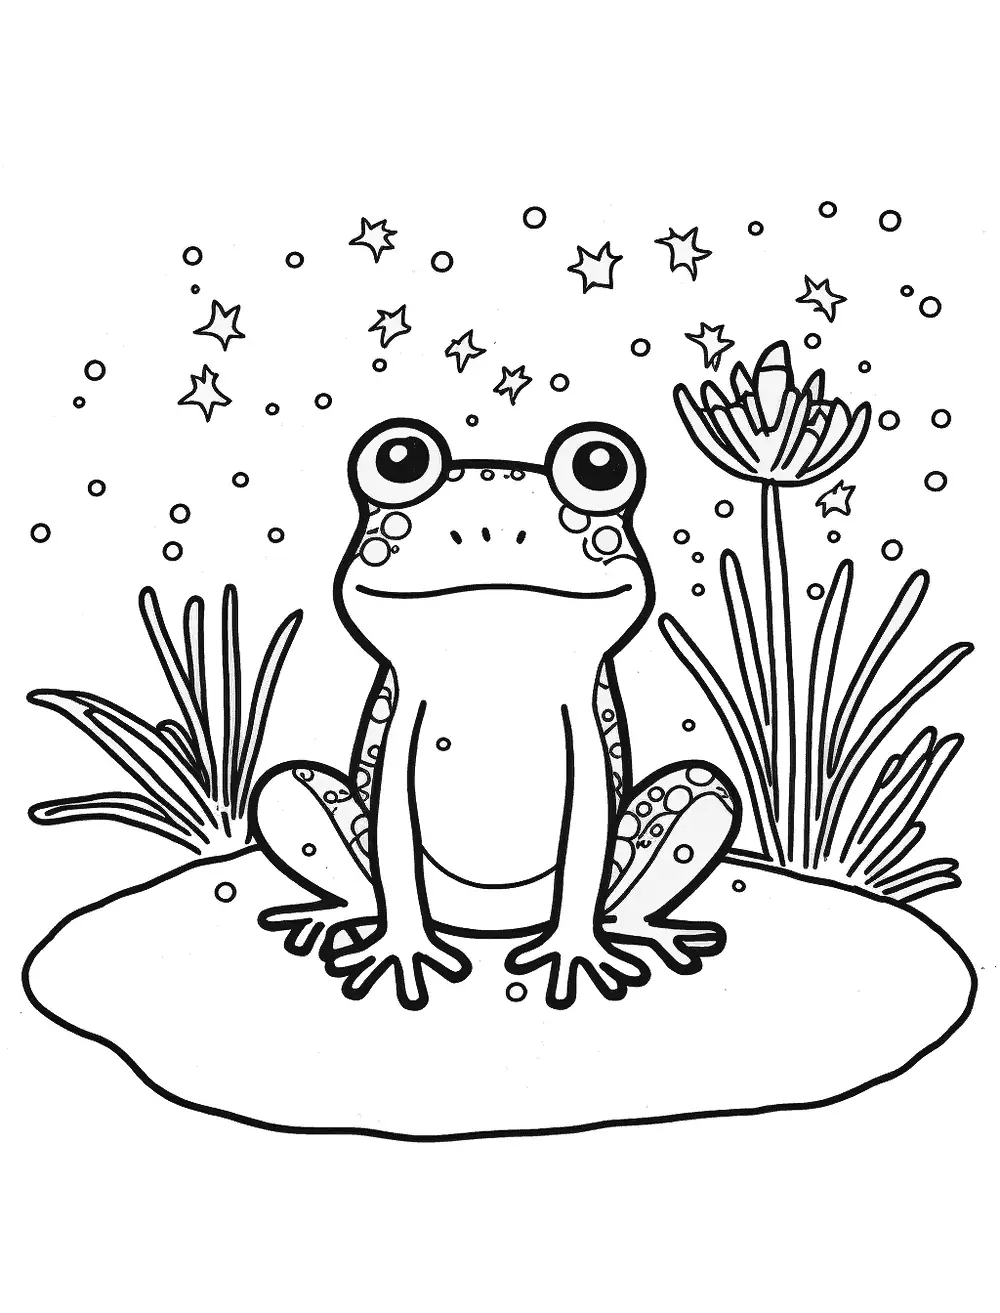 New Years Frog Coloring Page - A frog celebrating the New Year with fireworks.